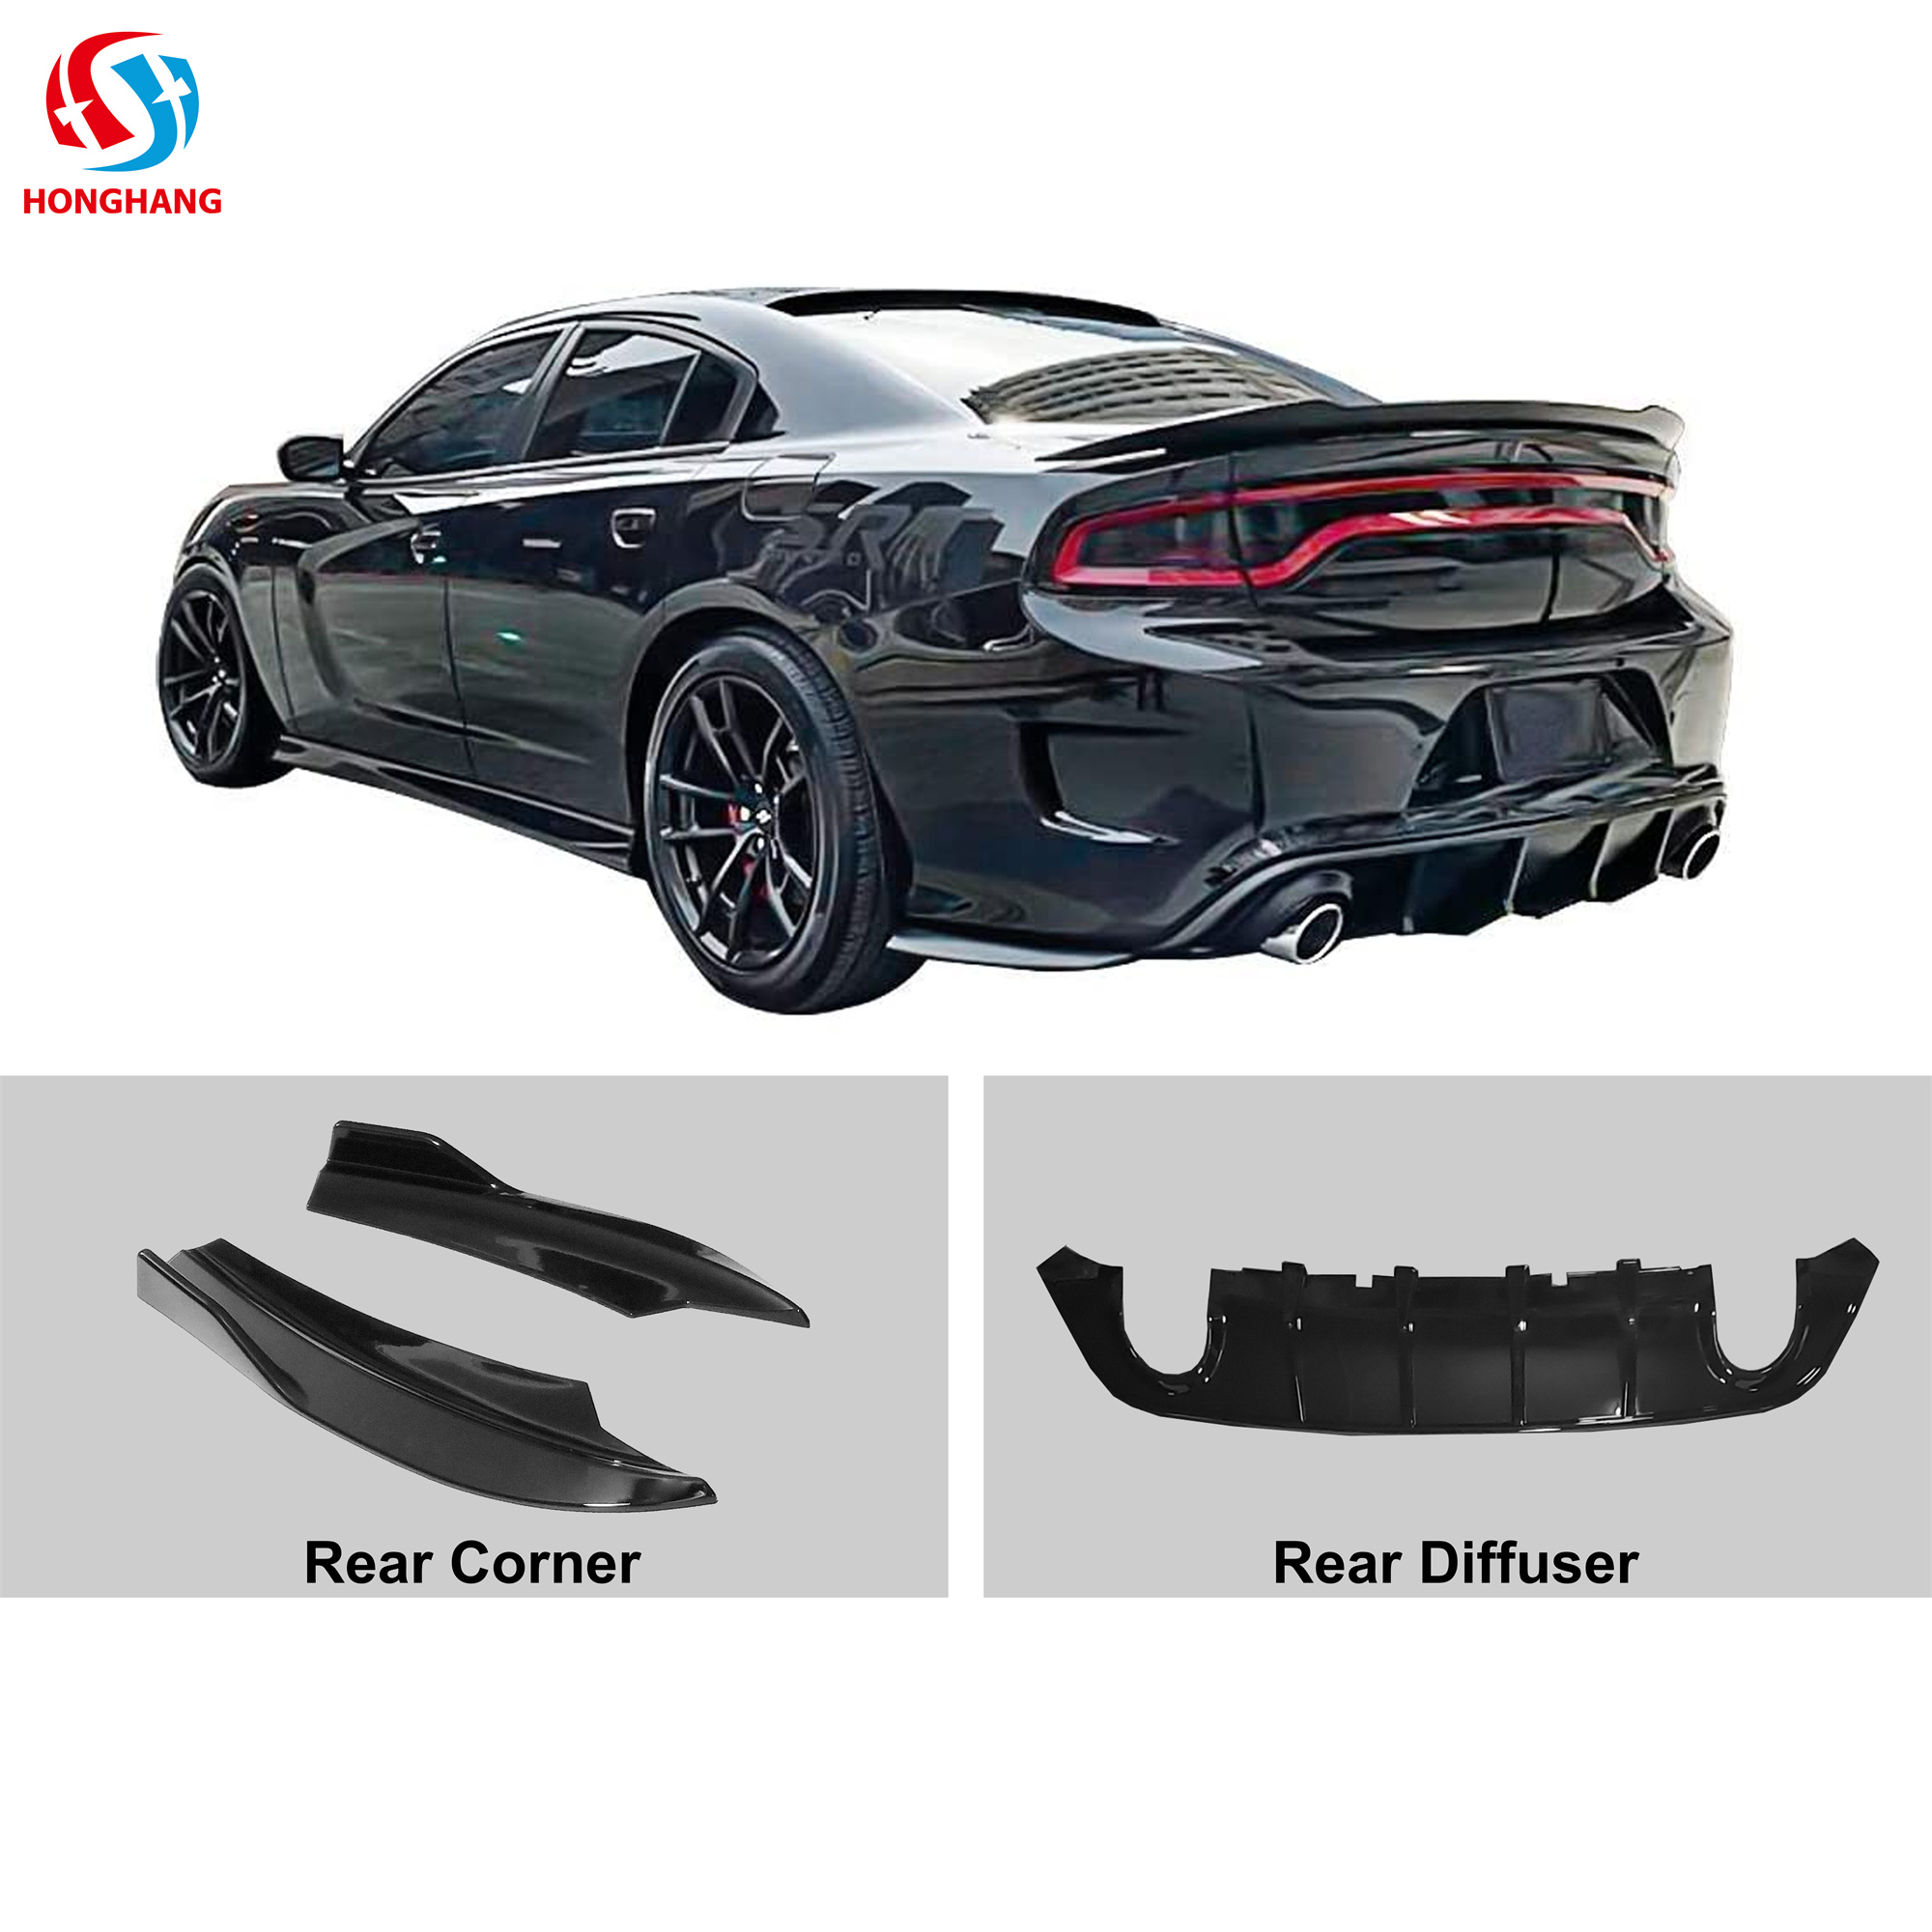  Dodge Charger Hellcat Wide Body Kit 2015 2016 2017 2018 2019 2020 2021 2022